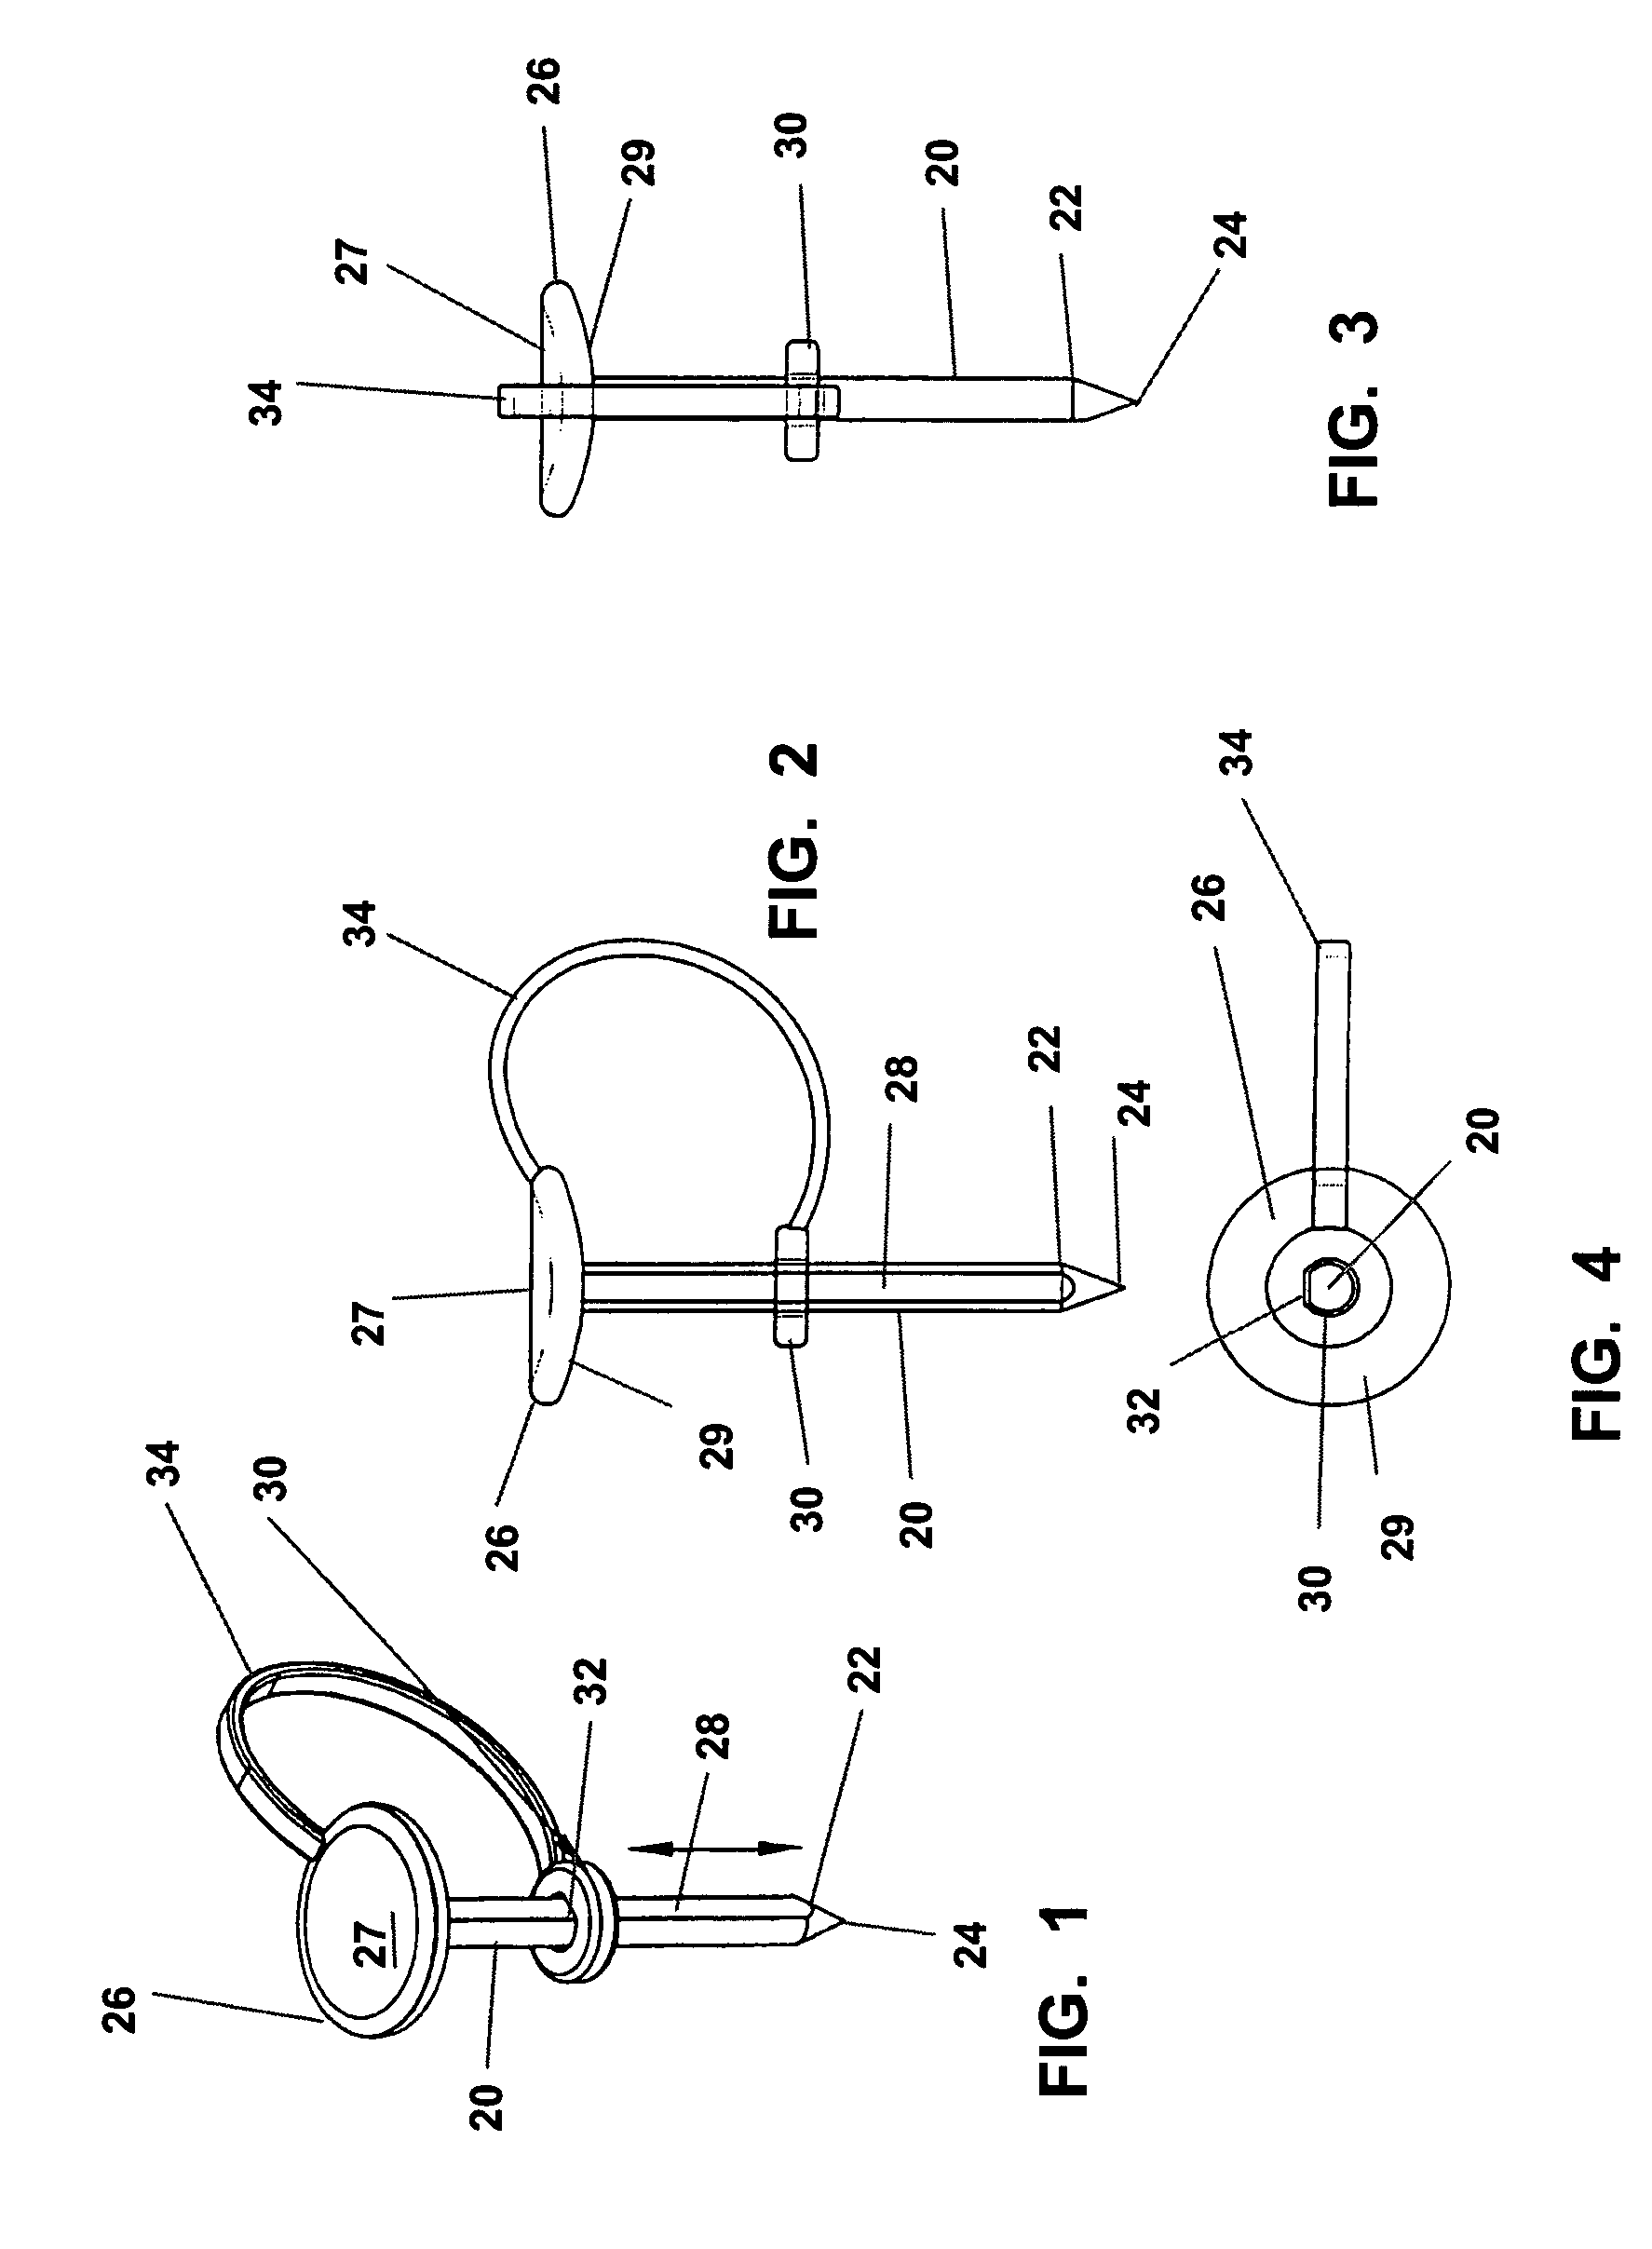 Seasoning stick and method and apparatus for preparing foods